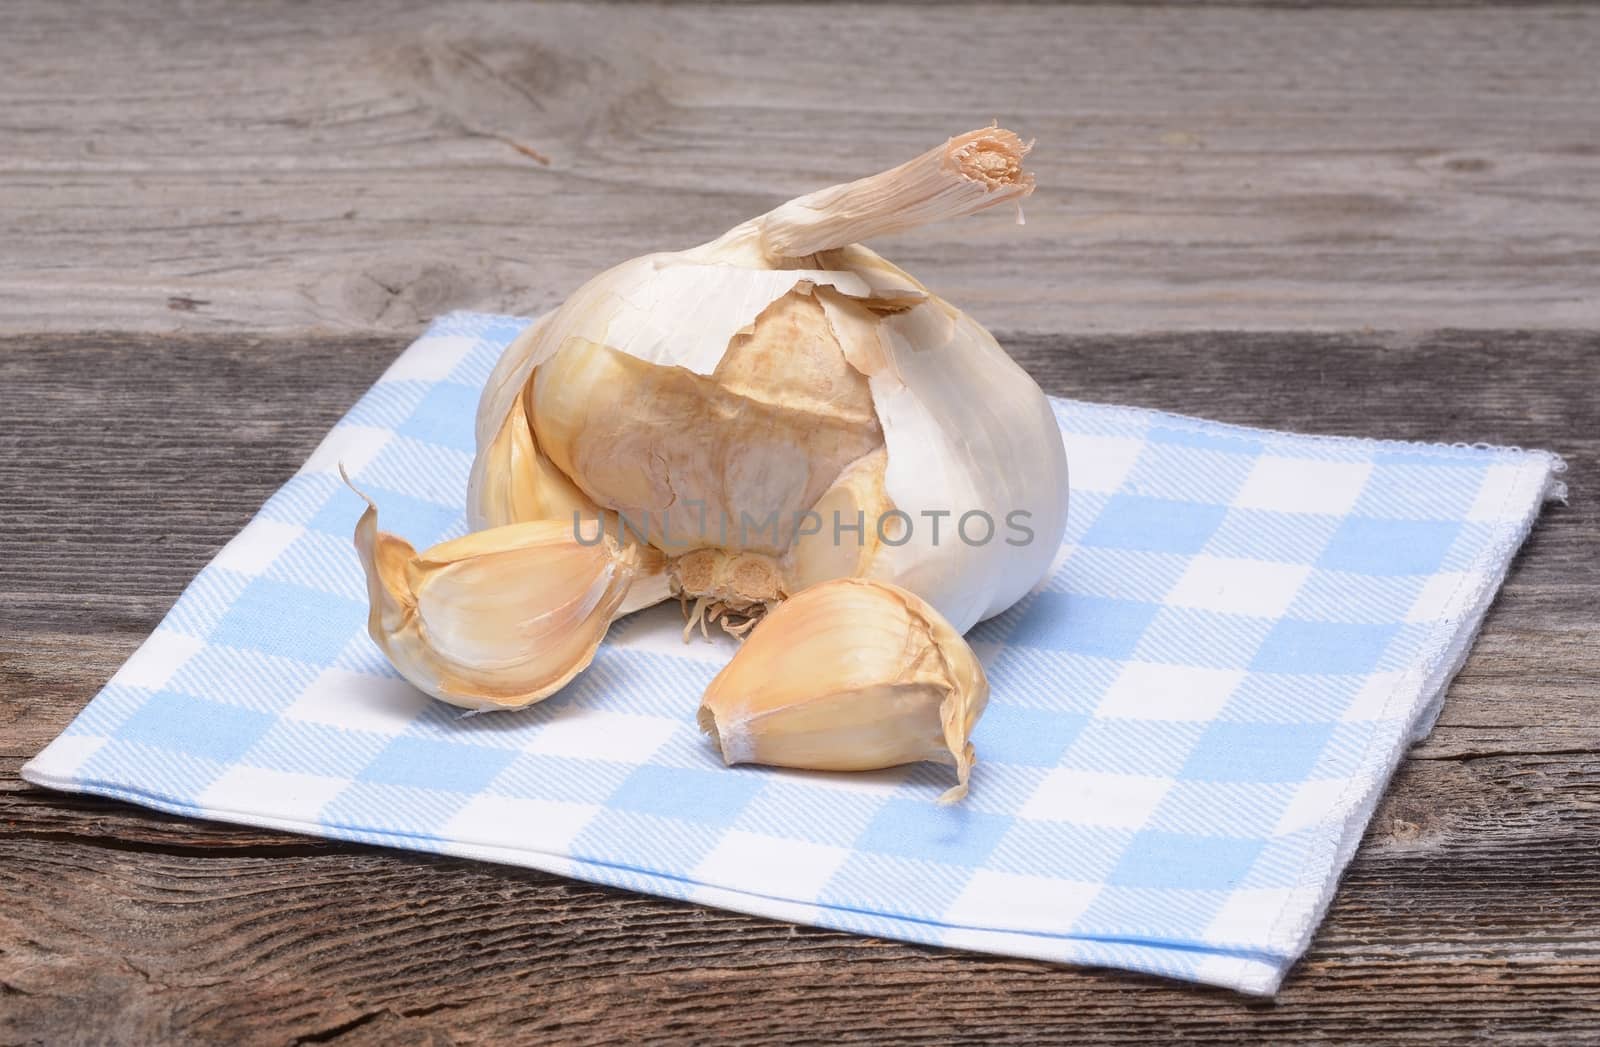 whole garlic on wood table by comet